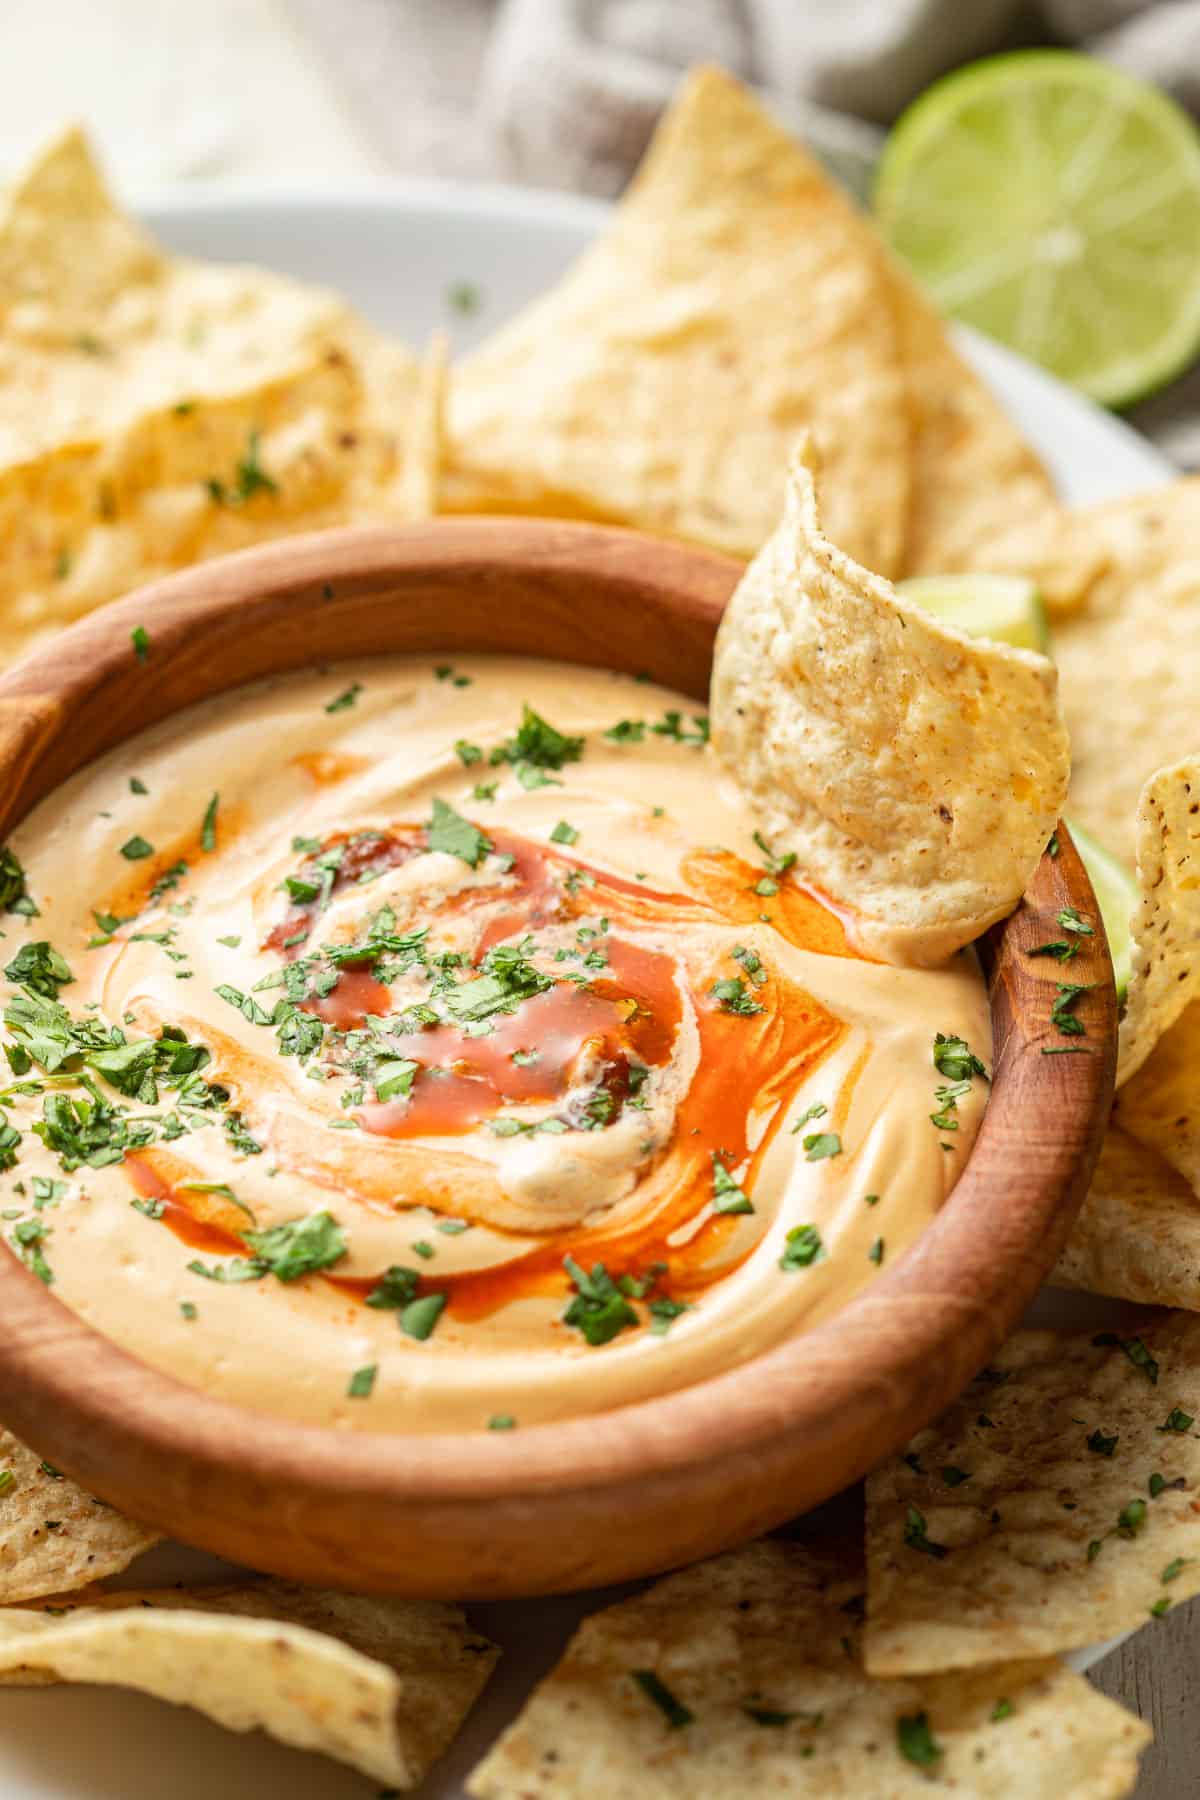 Bowl of Bowl of cashew queso with a chip in it.